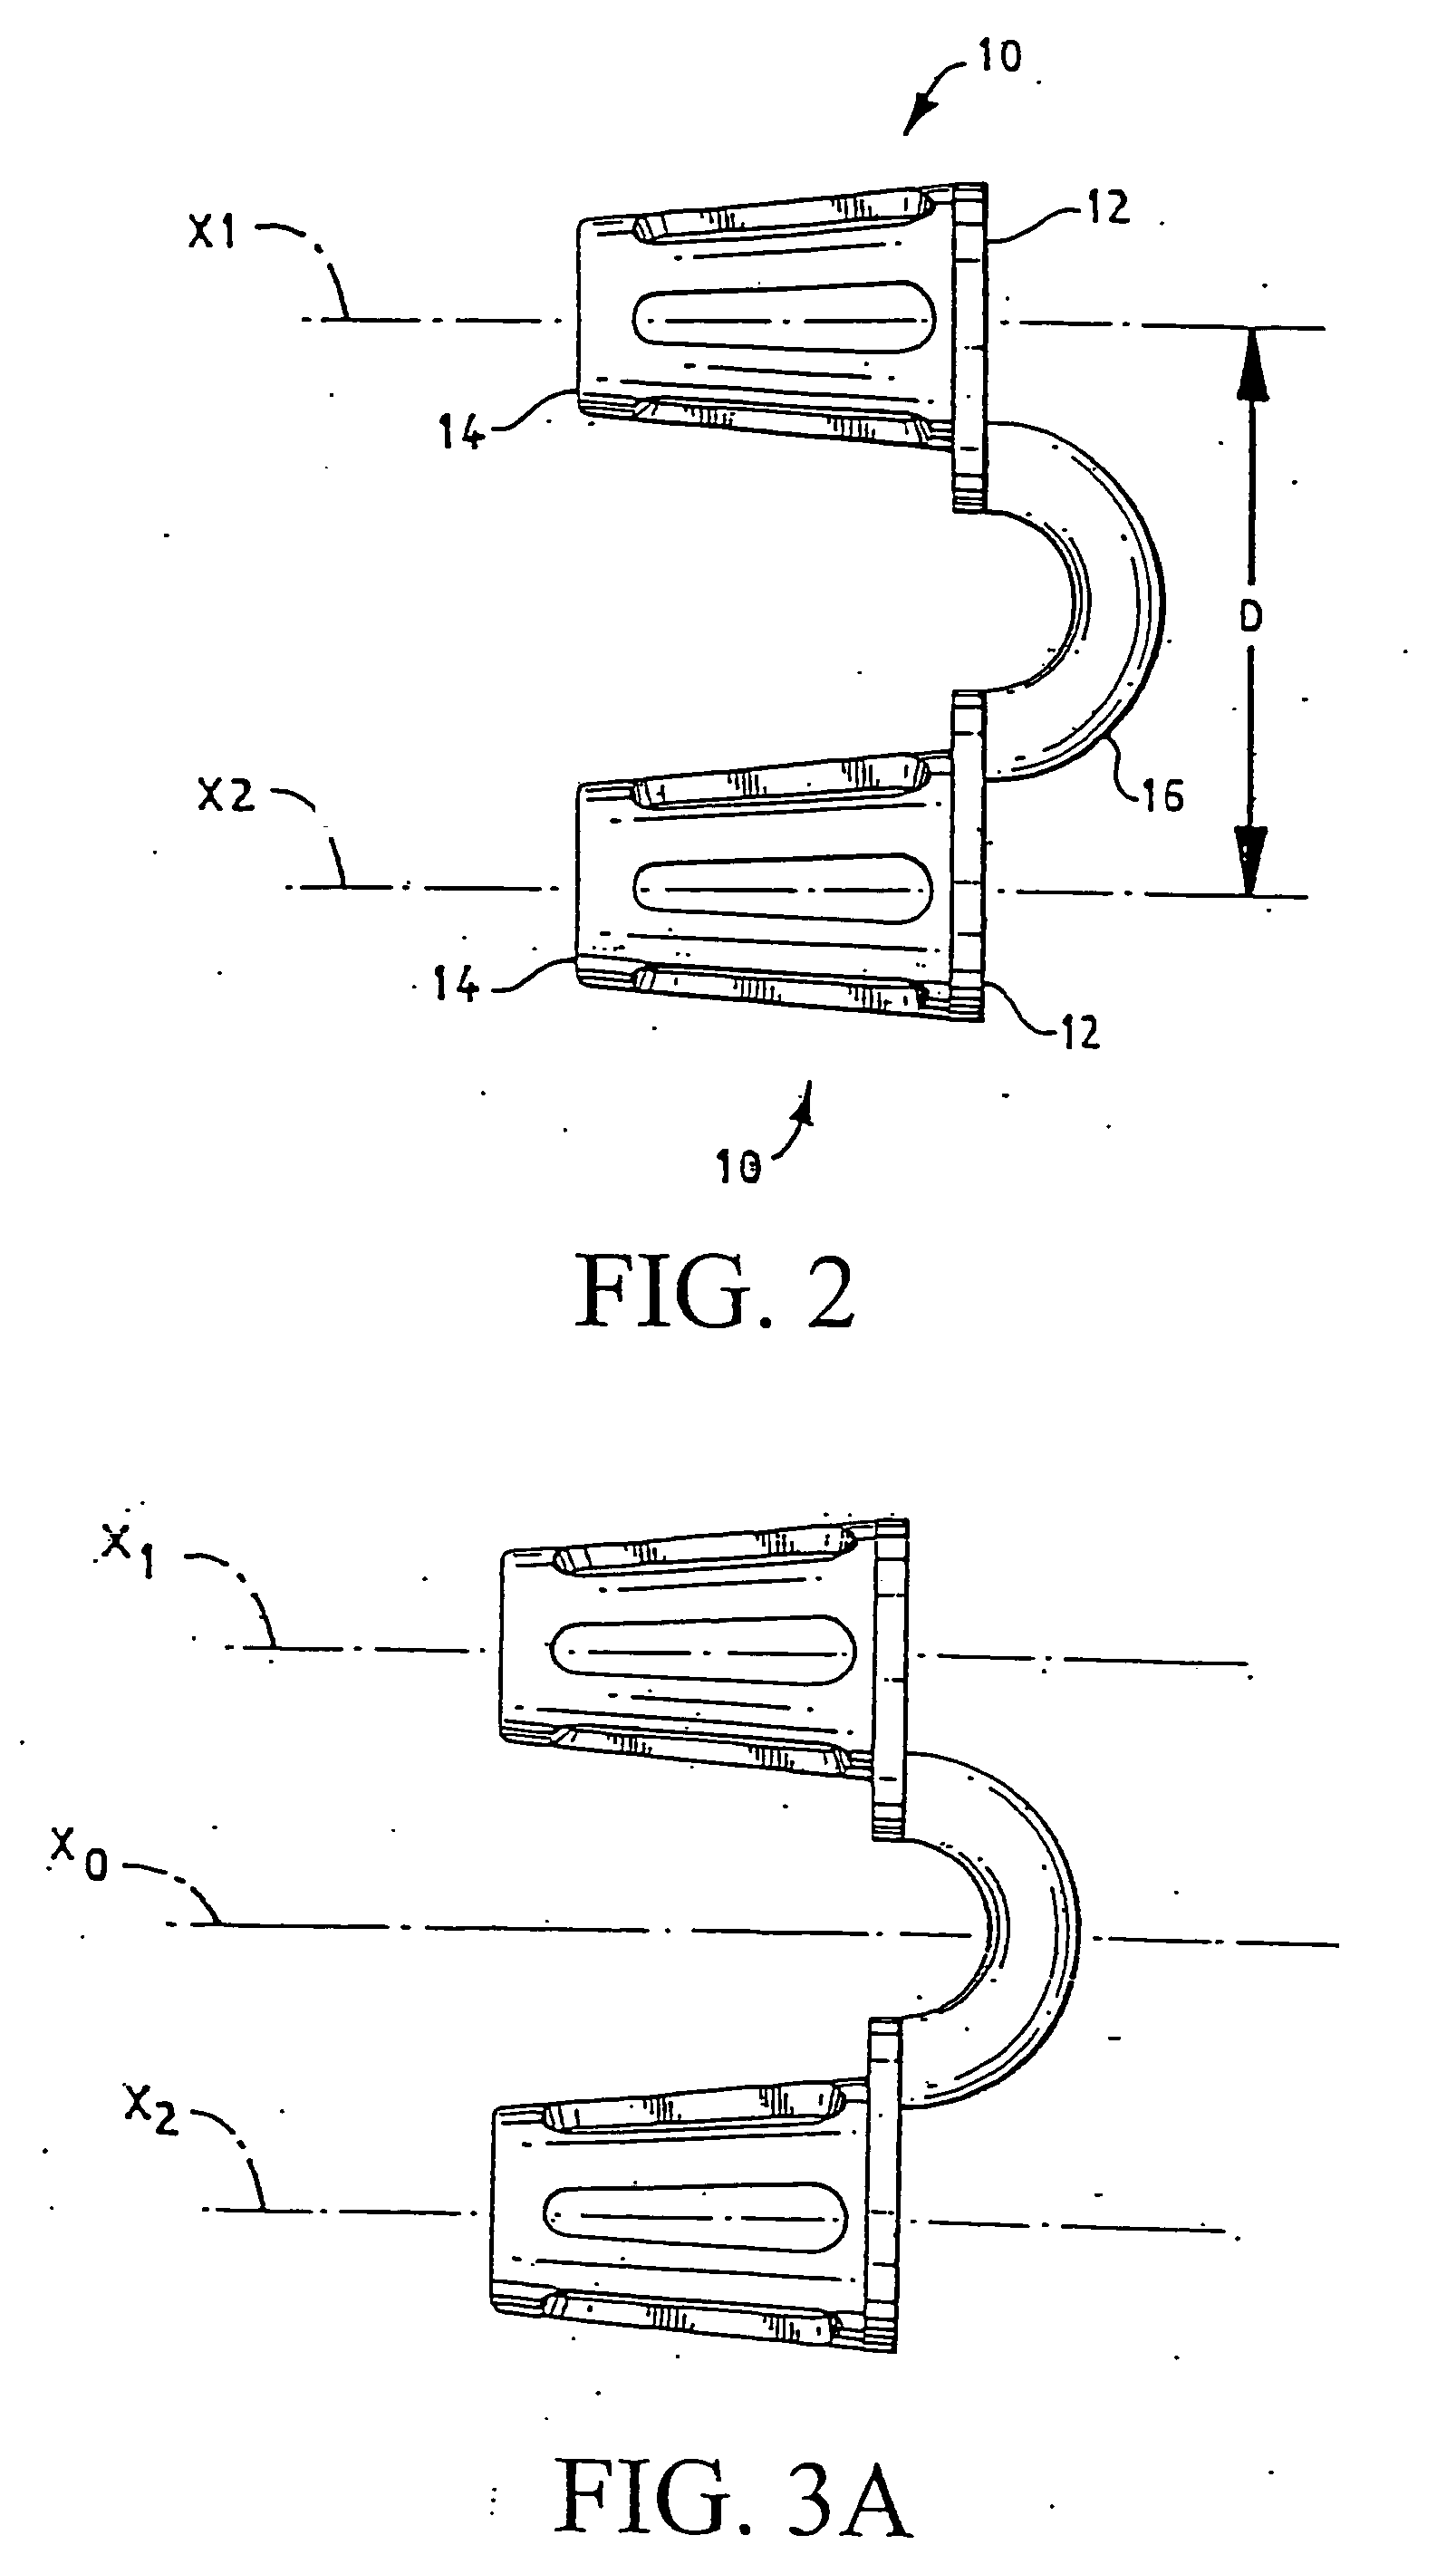 Nasal congestion and obstruction relief and breathing assist devices